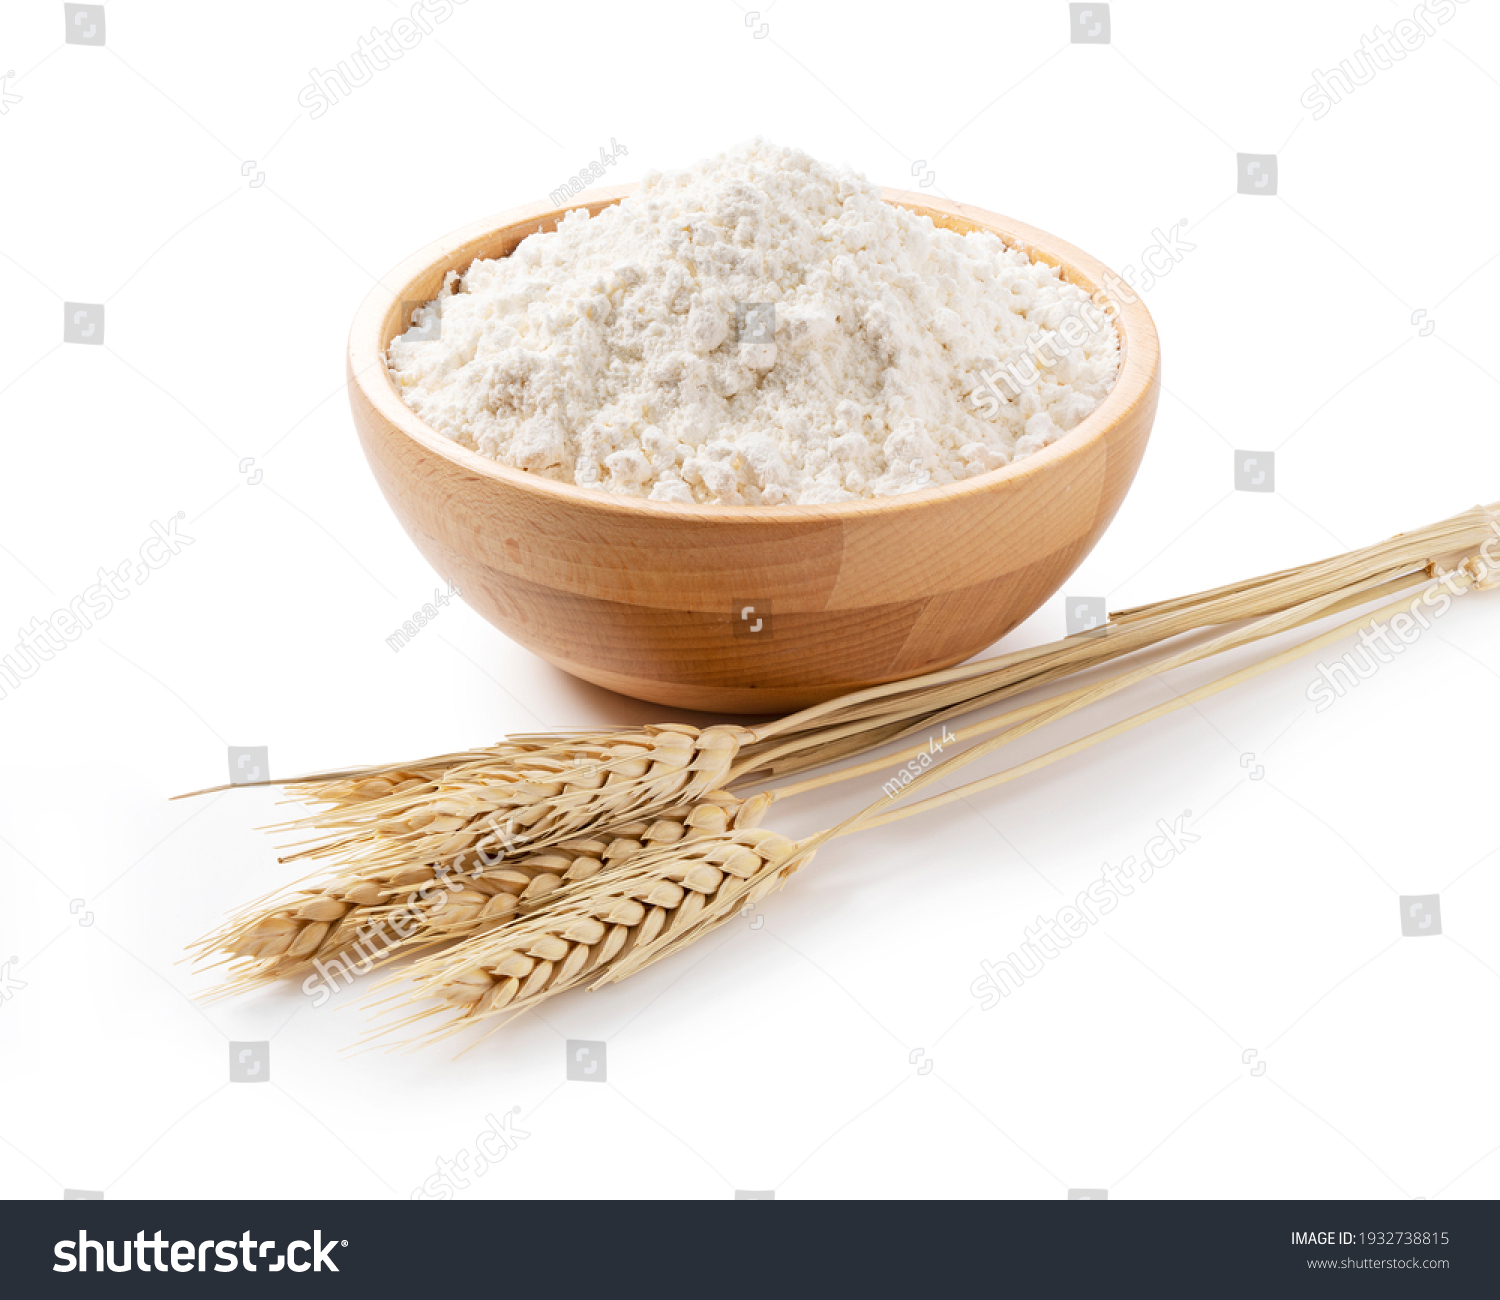 Ears of wheat and flour in a wooden bowl on a white background. Close-up, Material Photo #1932738815